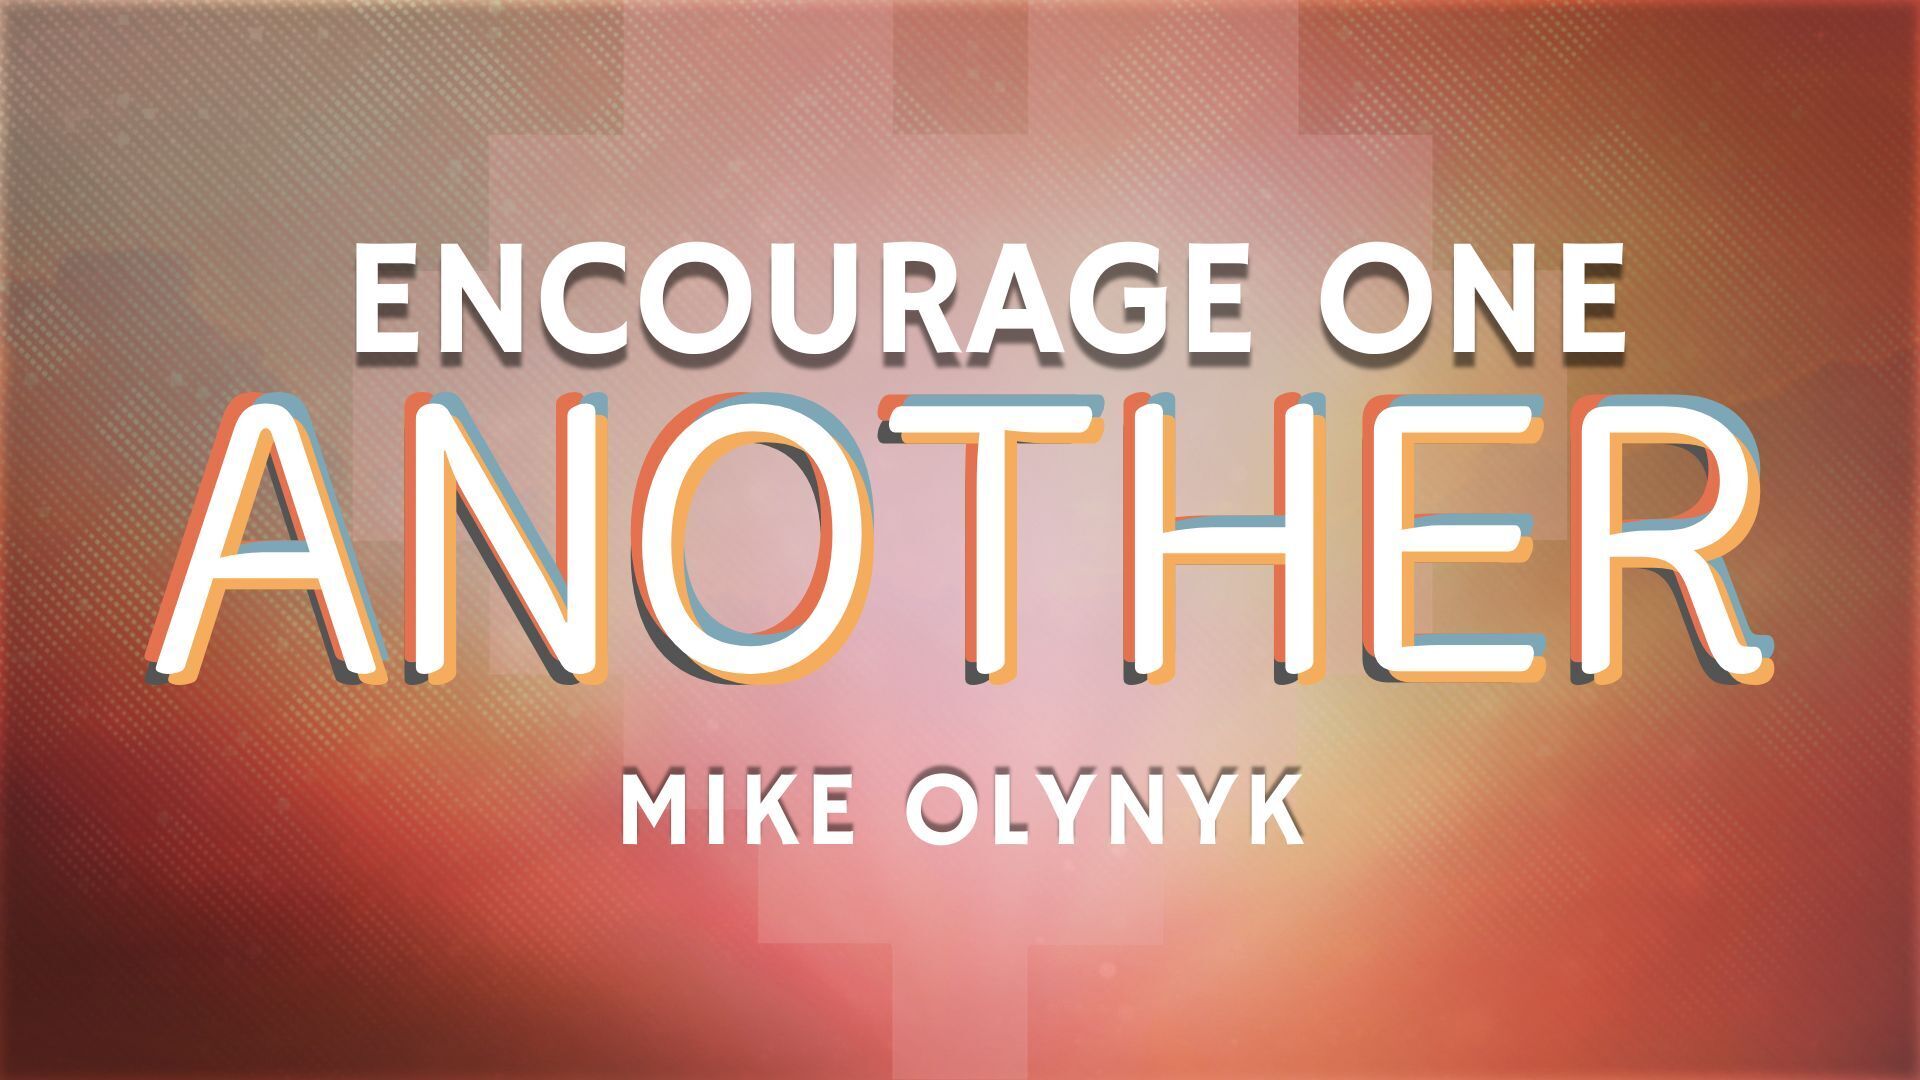 Preview of One Another - Encourage One Another